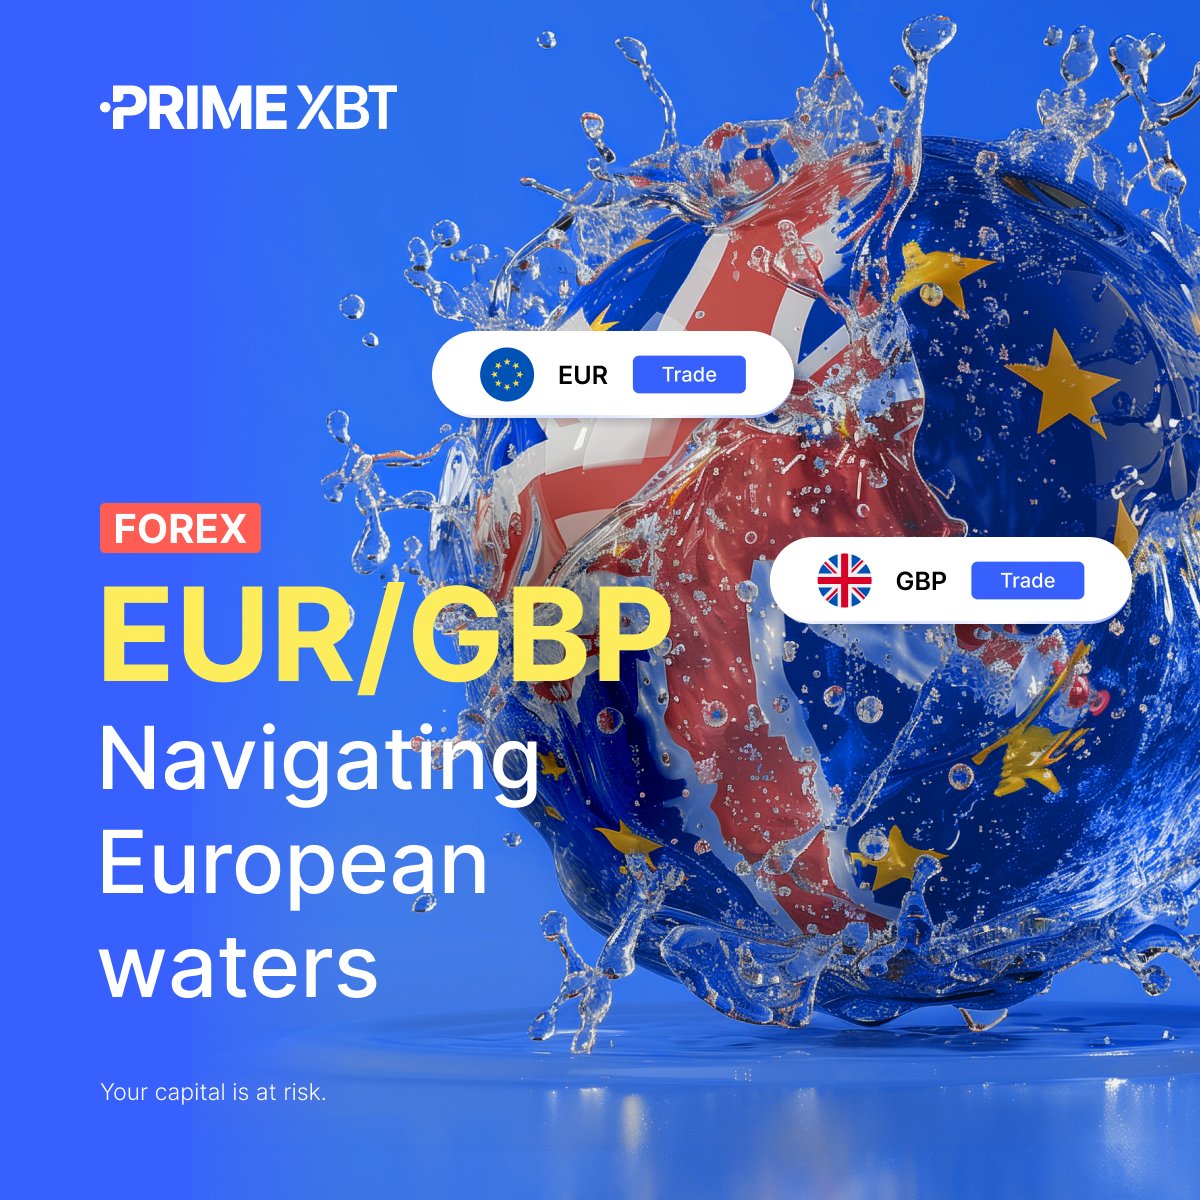 🇪🇺🇬🇧 Explore the #EURGBP pair, a reflection of European economic shifts.

Navigate the EU's policy changes and the UK's key economic signals for insightful trading opportunities.

➡️ Trade #forex: 
eng.primexbt.com/42zoaWW

#PrimeXBT #Trading